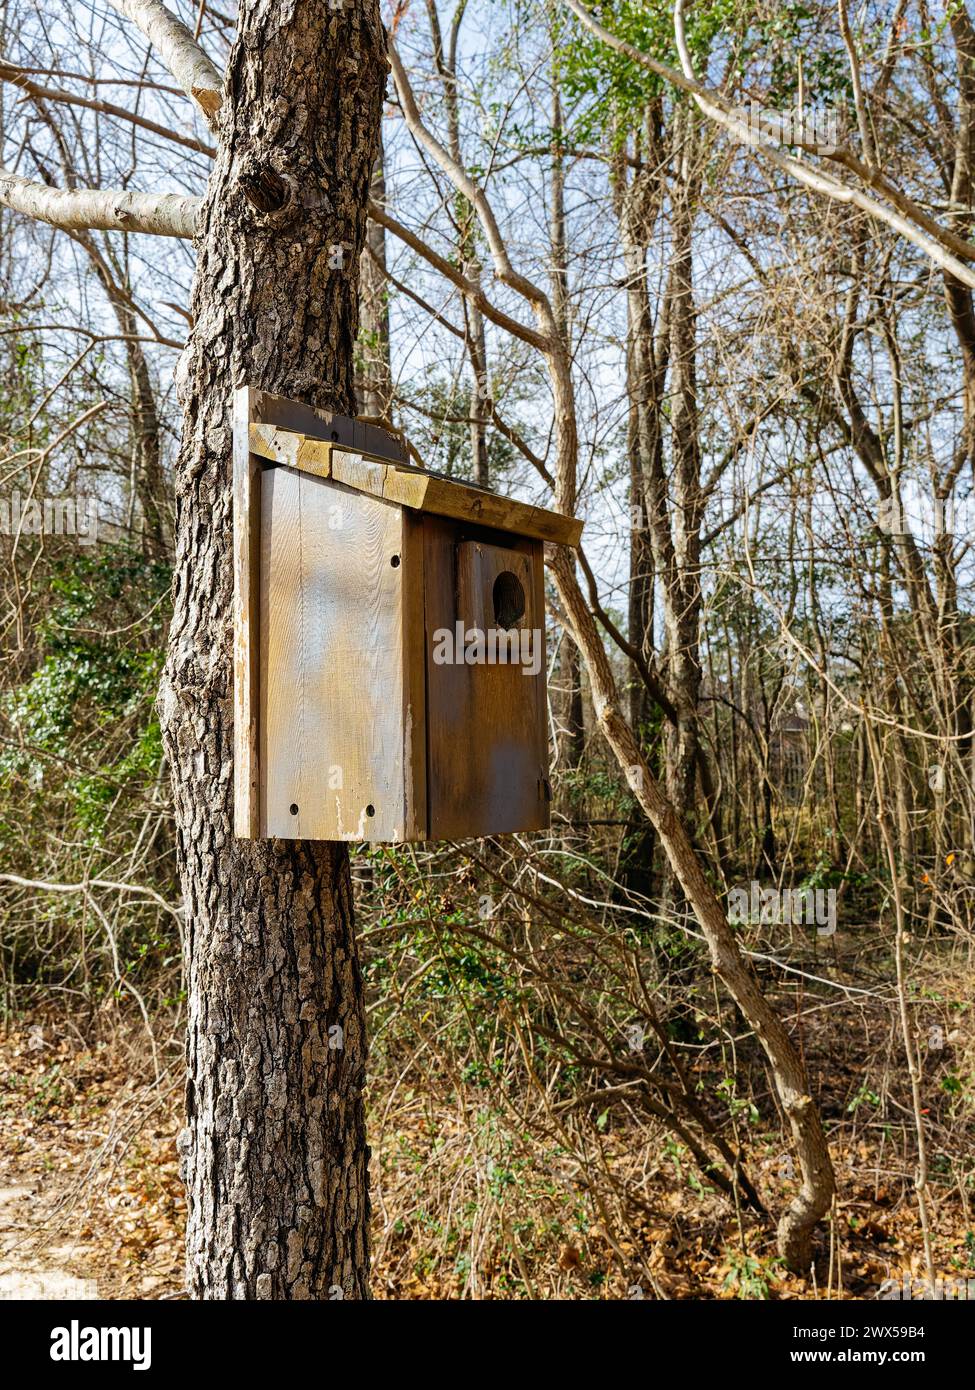 Wooden bluebird birdhouse attached to a tree to attract birds to nest in Alabama, USA. Stock Photo